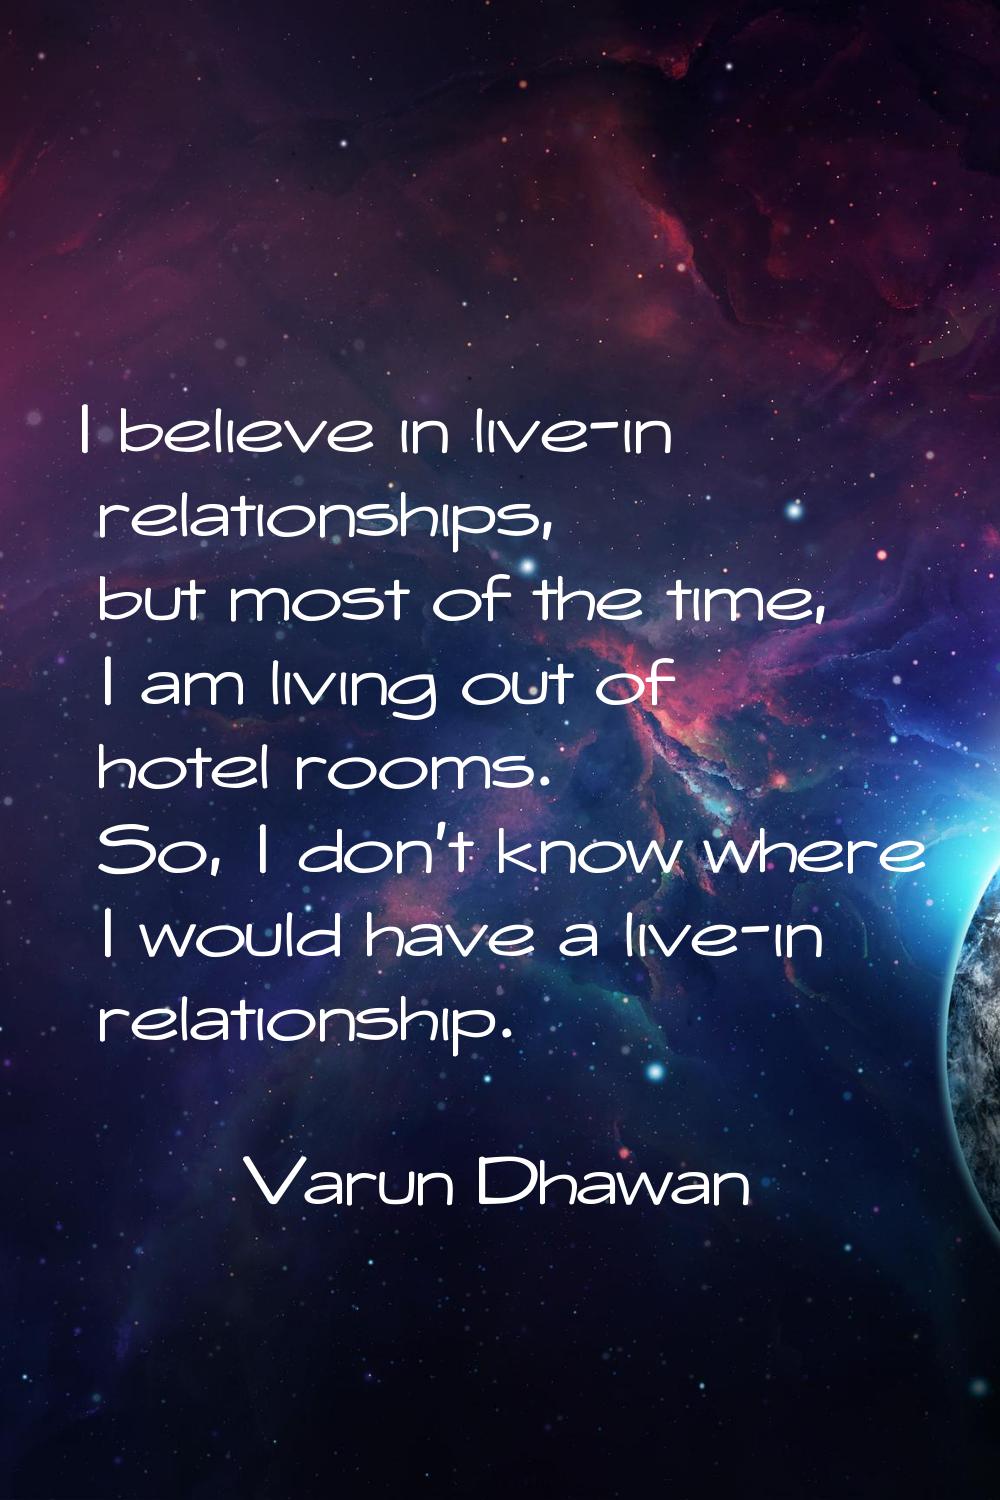 I believe in live-in relationships, but most of the time, I am living out of hotel rooms. So, I don